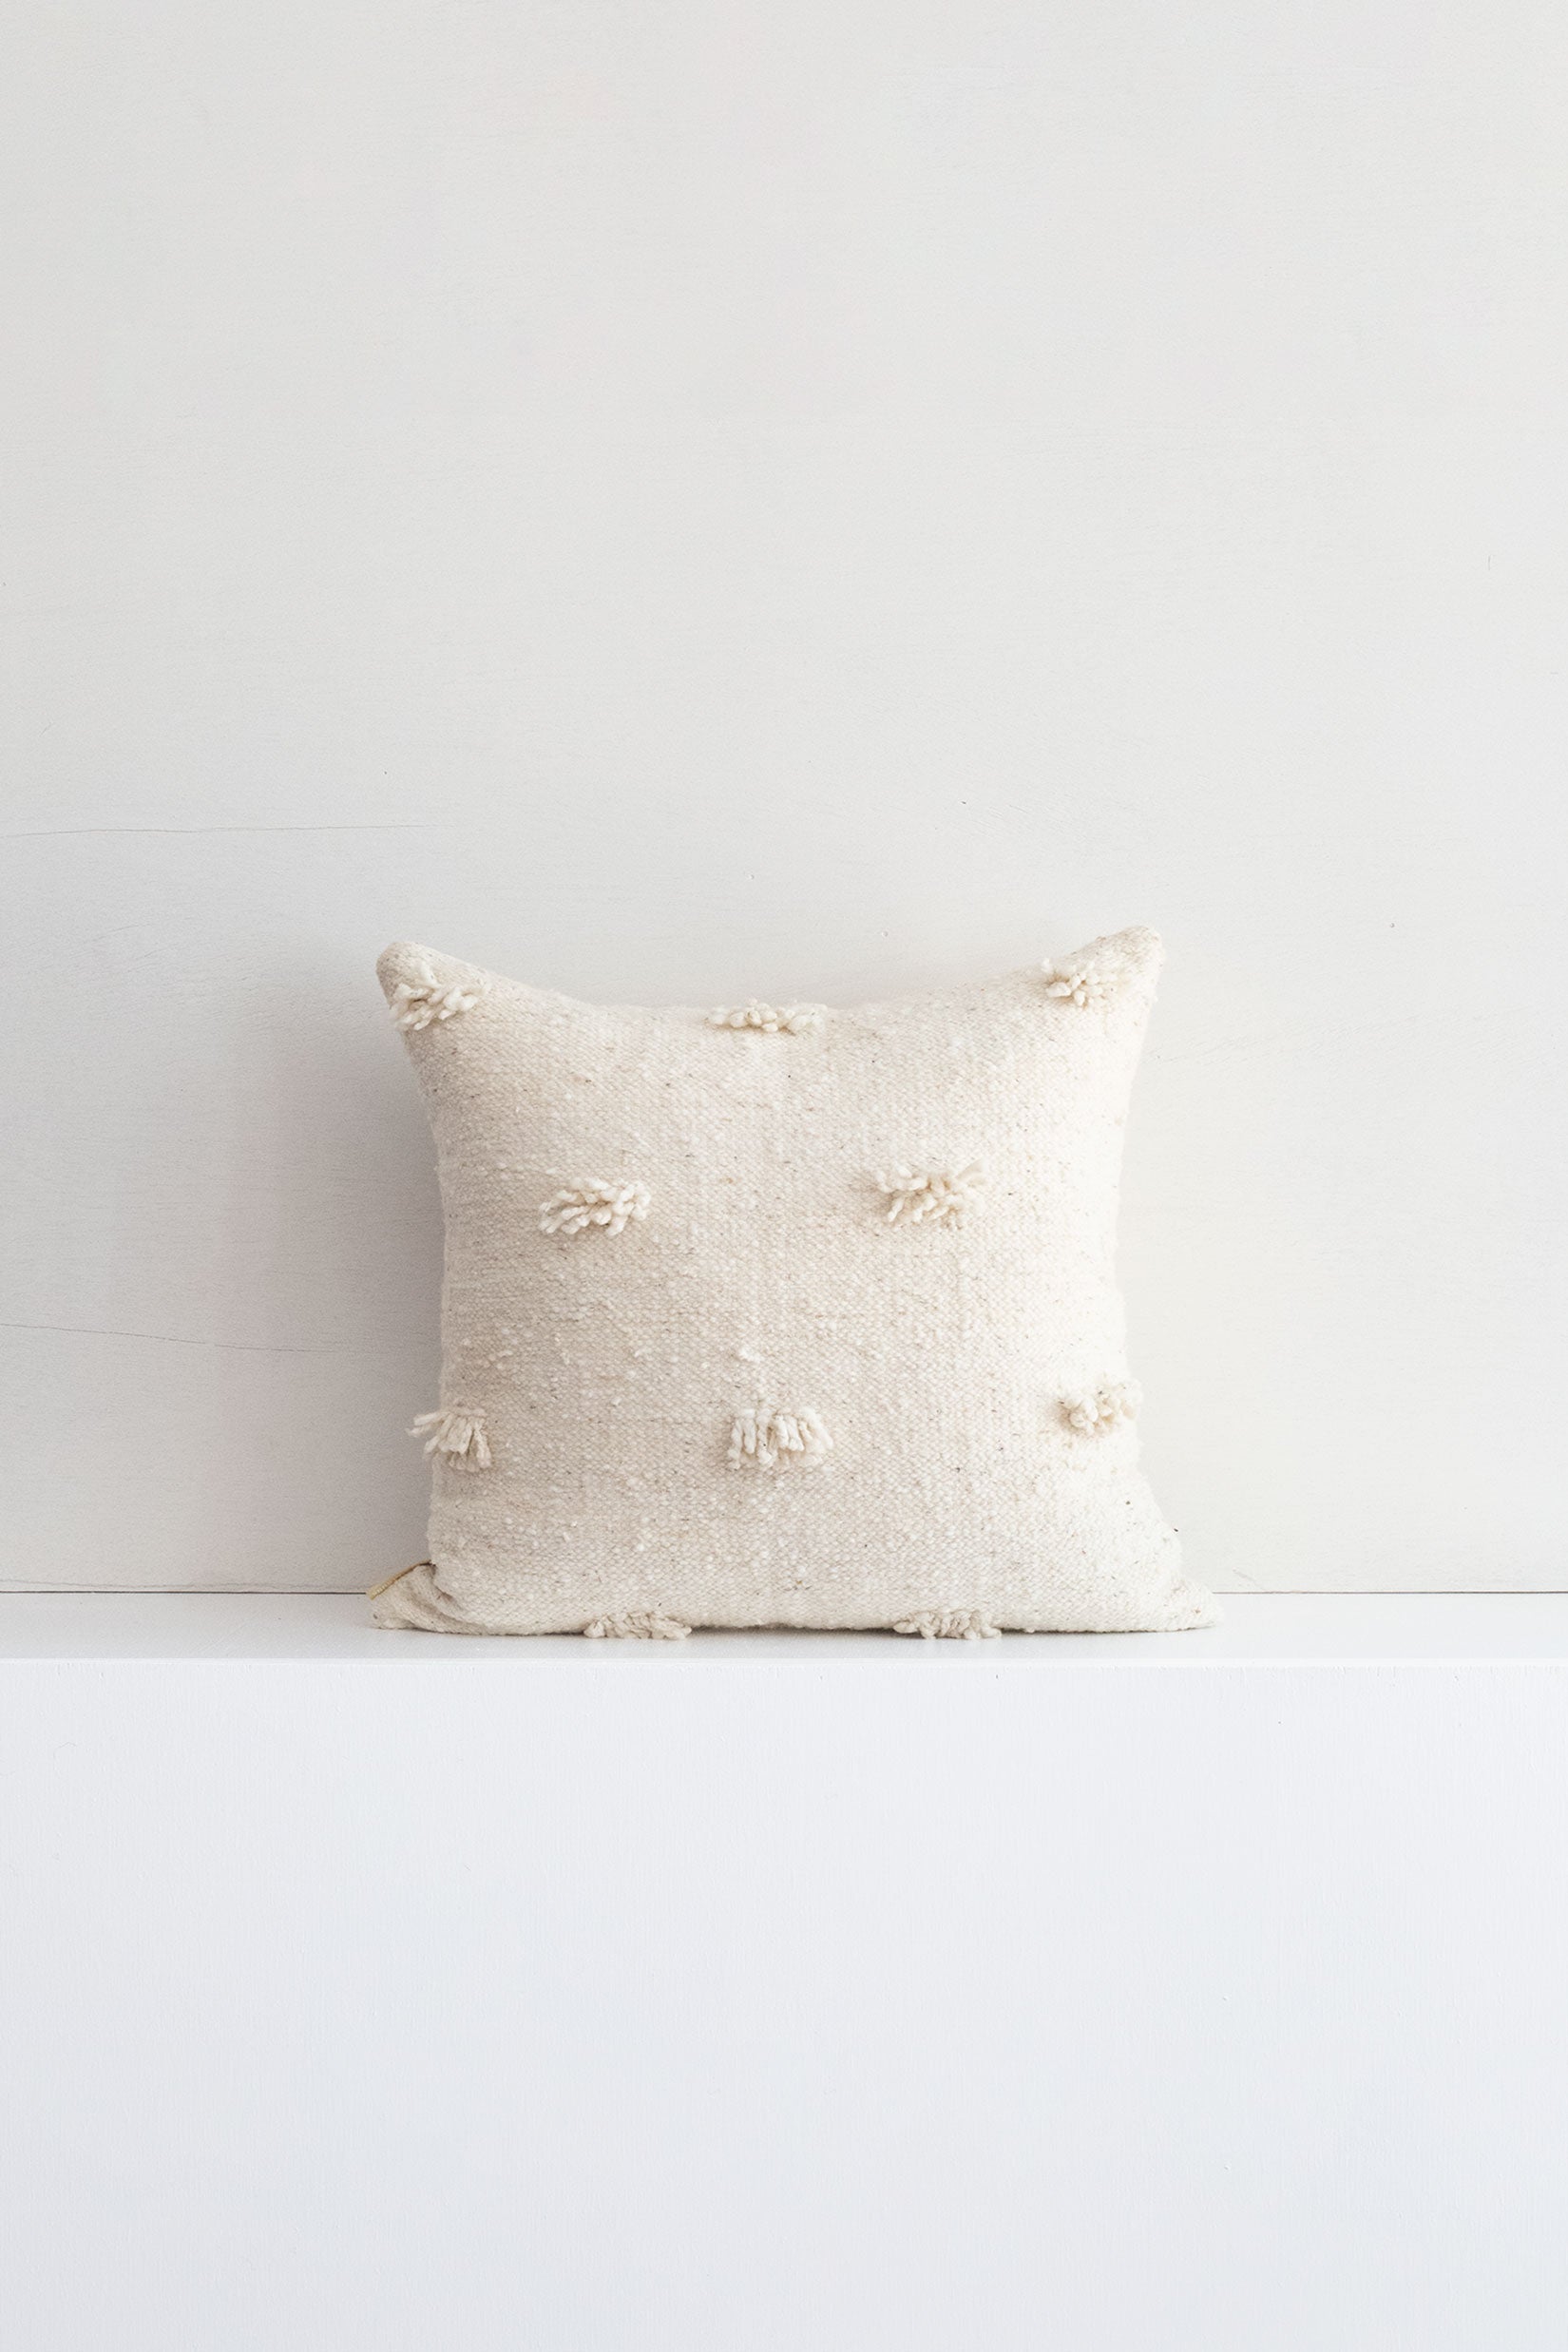 Square lumbar throw pillow with fringe accents throughout